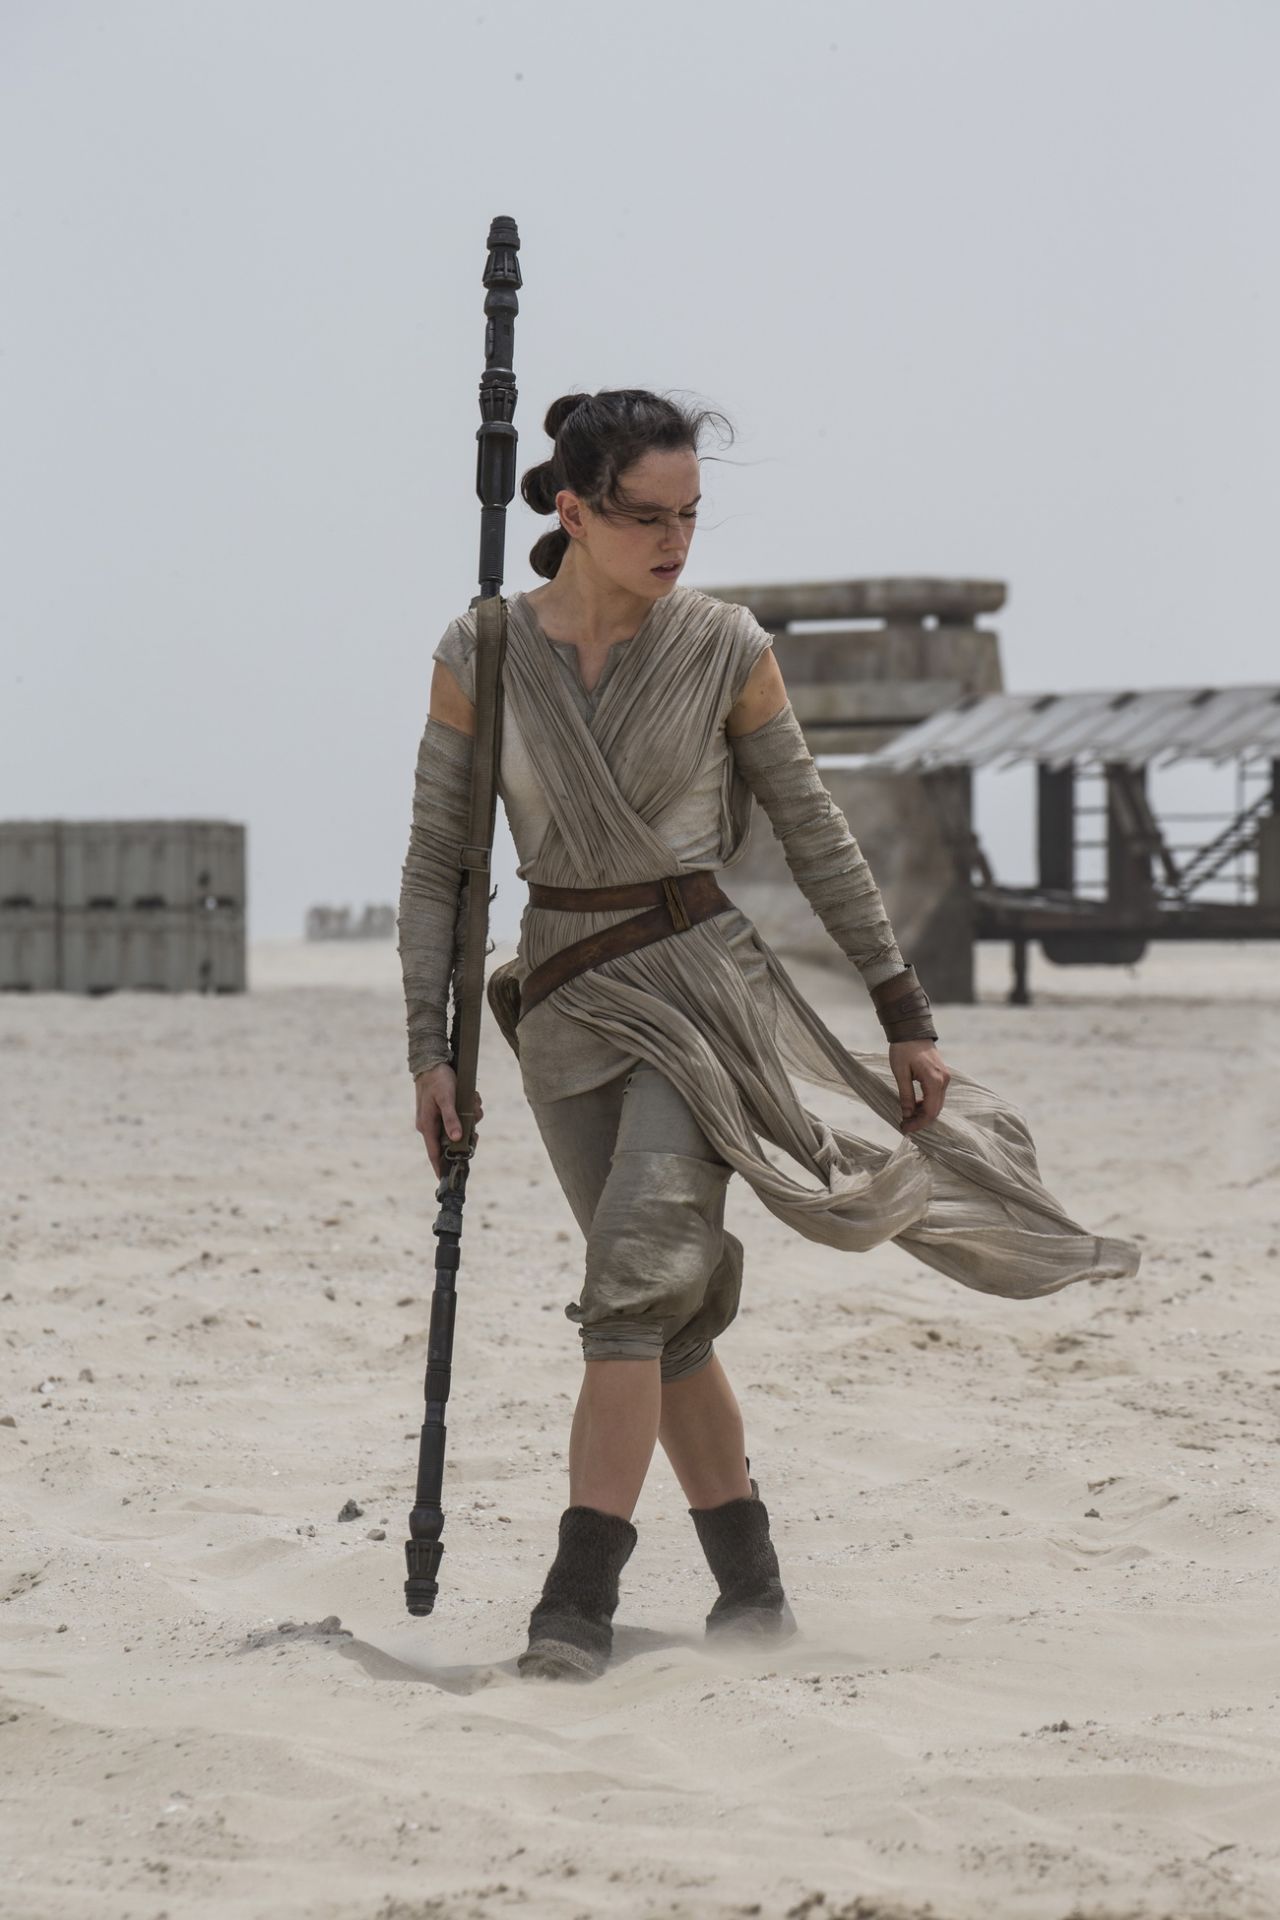 Daisy Ridley Star Wars The Force Awakens Poster And Photos 2015 • Celebmafia